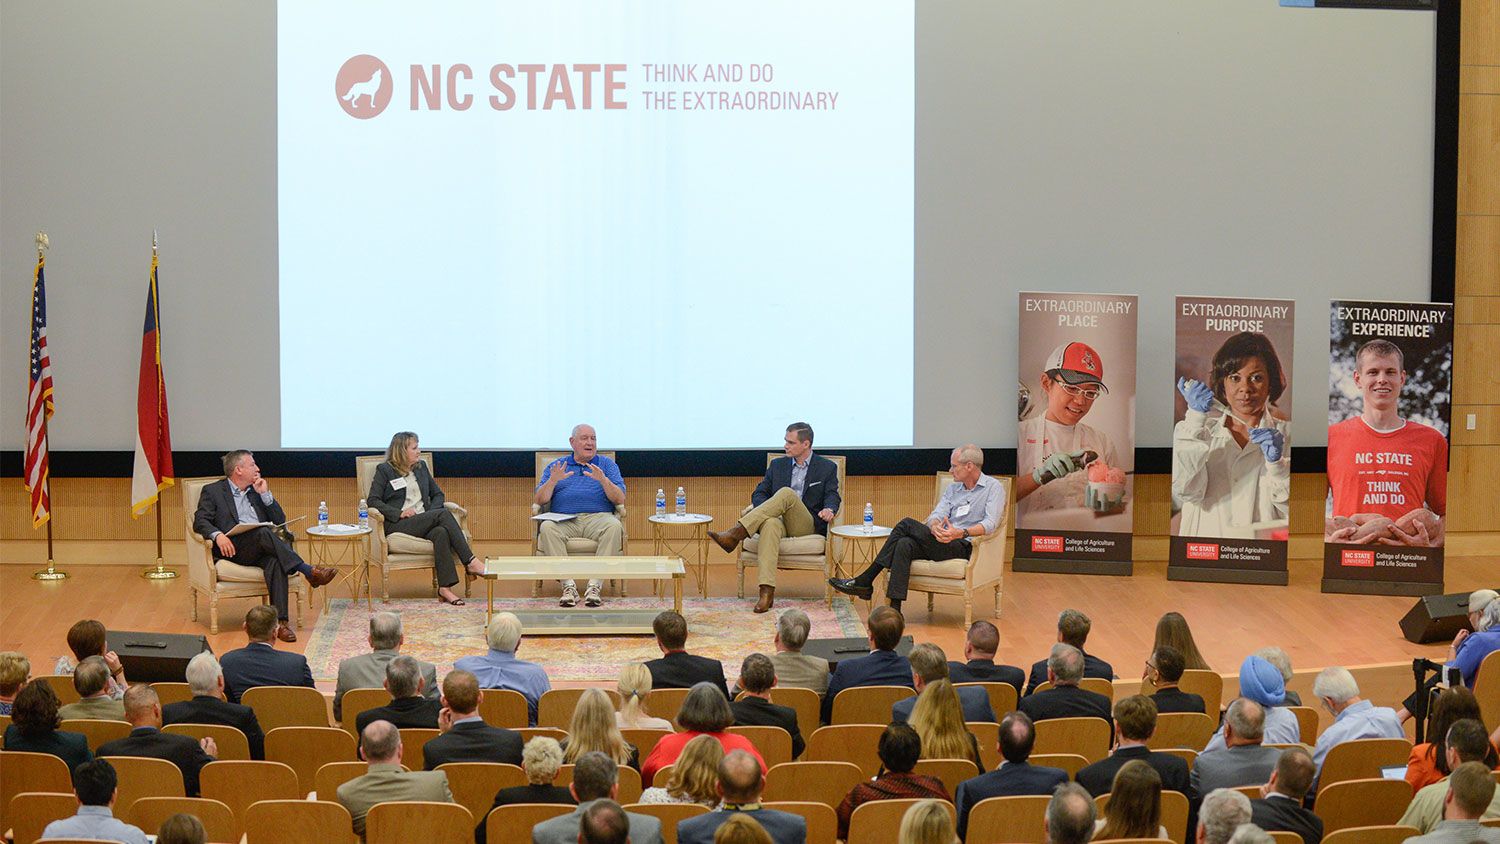 Panelists on stage in the Hunt Library auditorium.